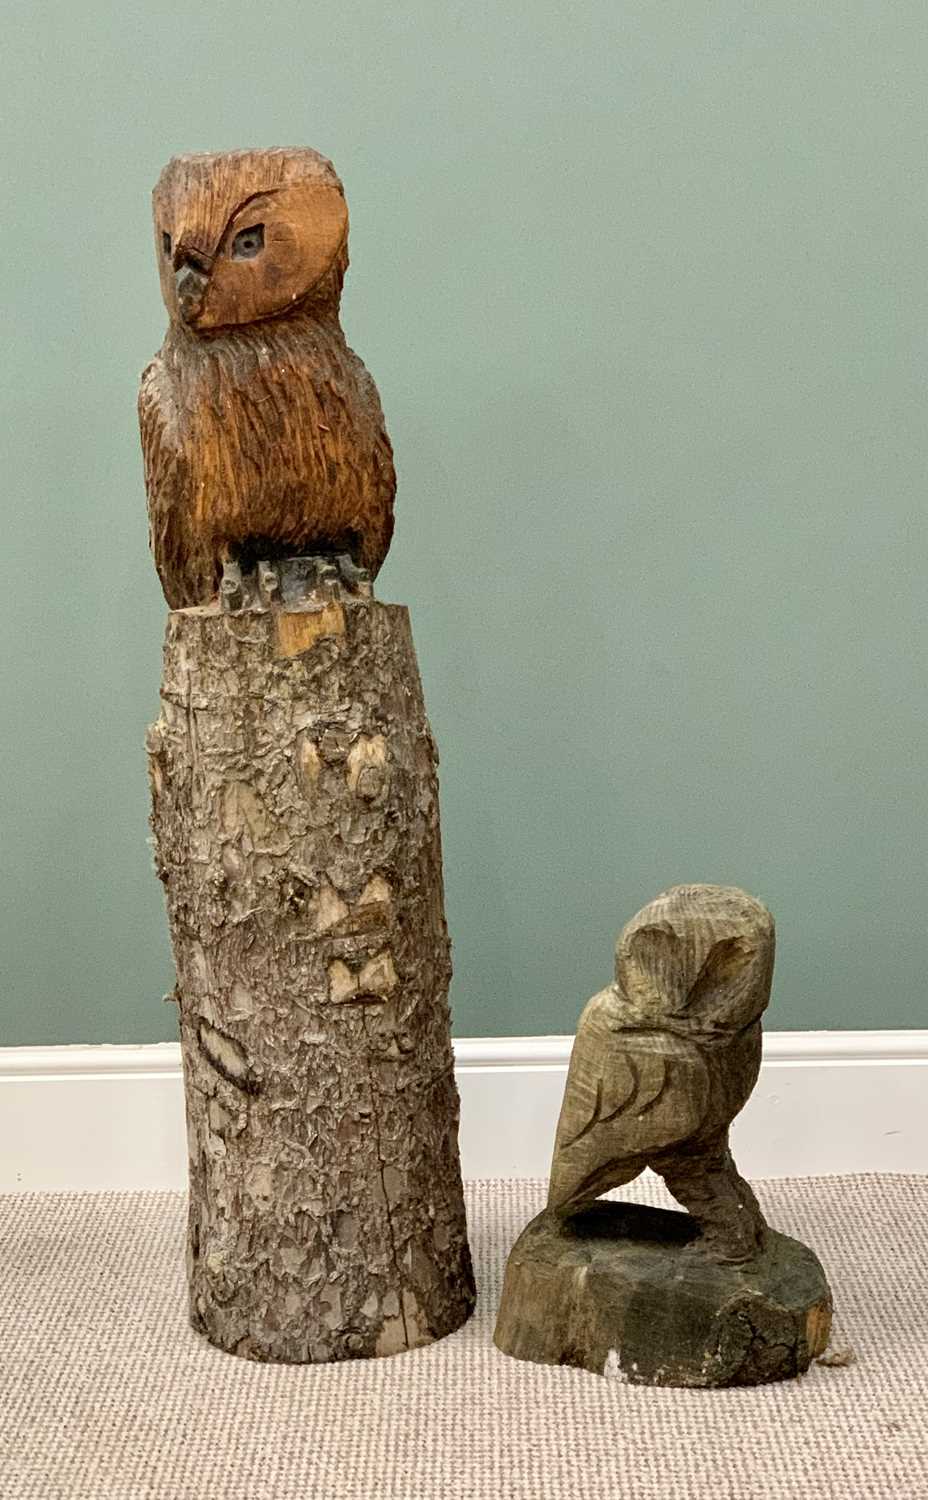 TWO CARVED WOODEN OWL GARDEN ORNAMENTS - one seated on a natural trunk, 110cms H, the other fully